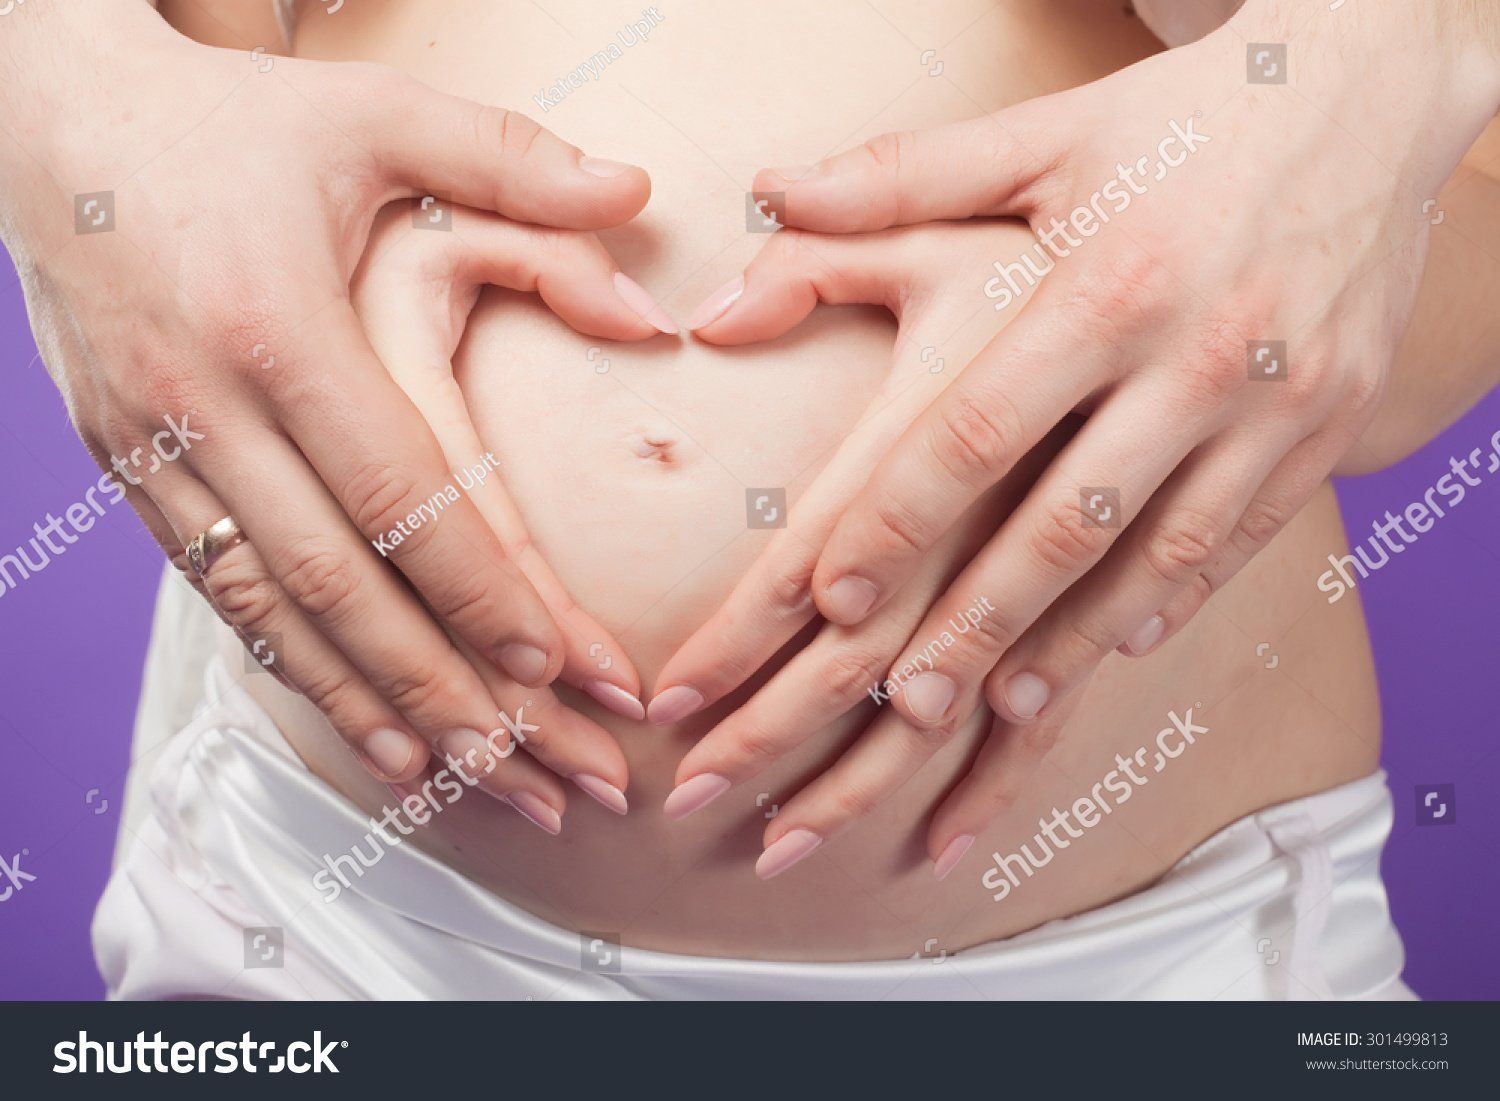 Hand belly